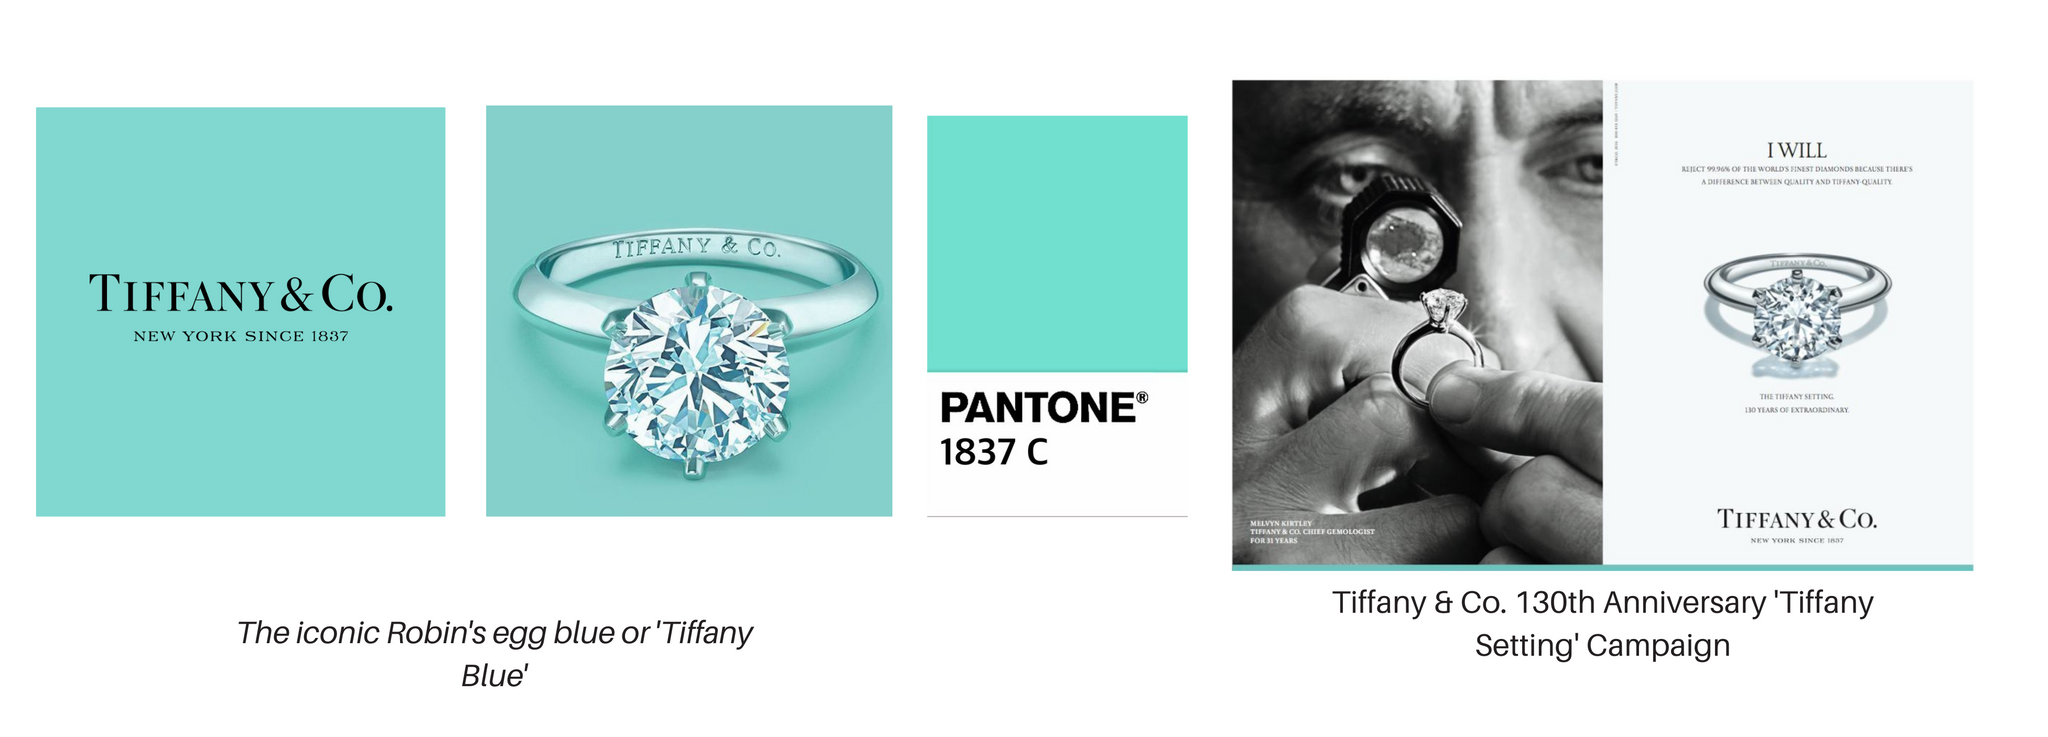 Founded In 1837 In New York City, Tiffany & Co - Tiffany And Co